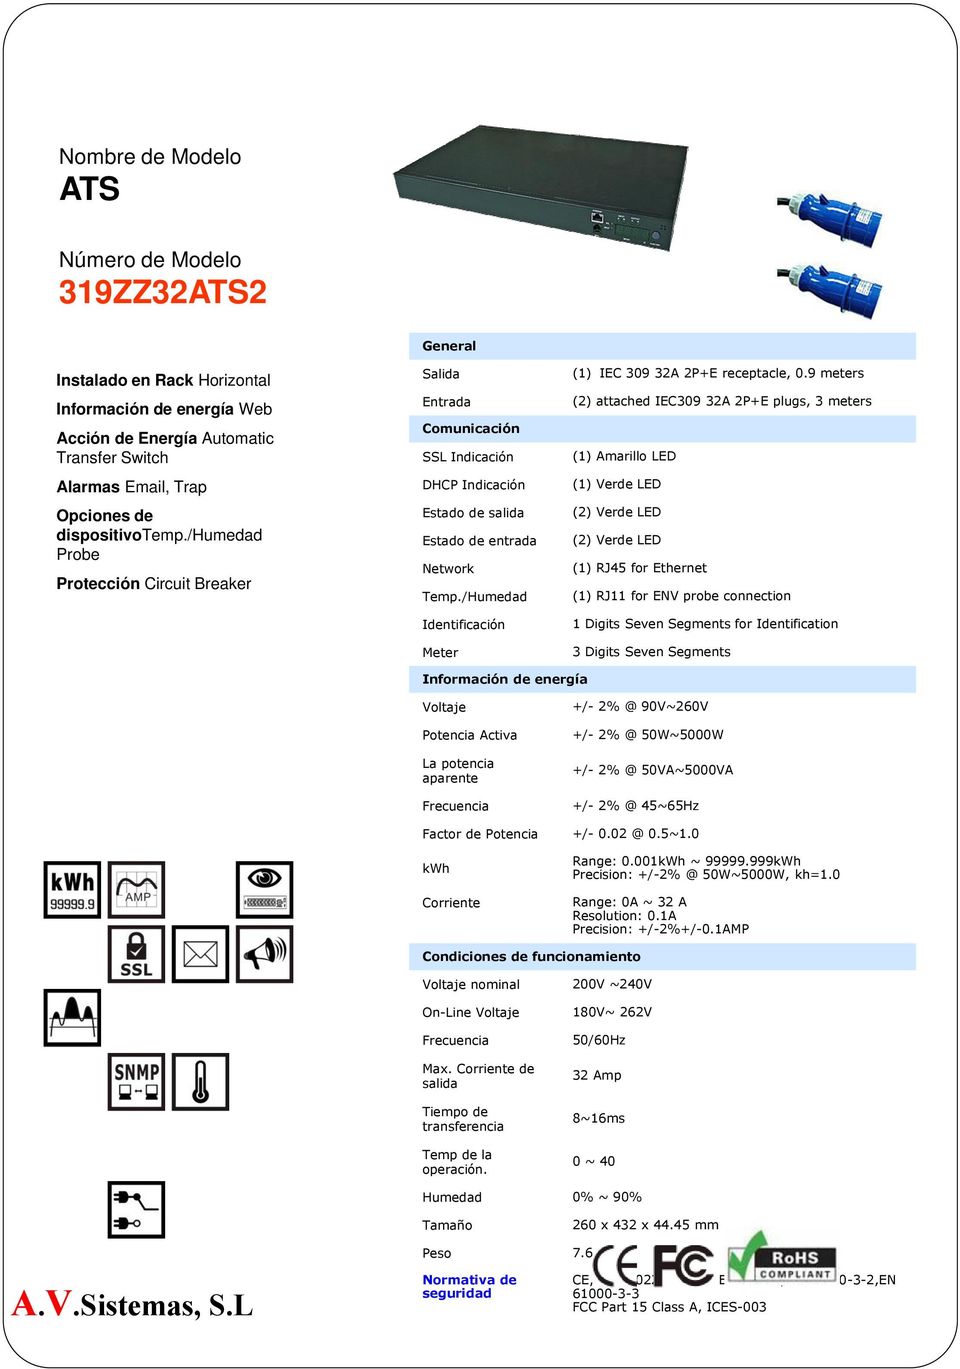 9 meters (2) attached IEC309 32A 2P+E plugs, 3 meters (2) Verde LED (2) Verde LED (1) RJ45 for Ethernet (1) RJ11 for ENV probe connection 1 Digits Seven Segments for Identification 3 Digits Seven